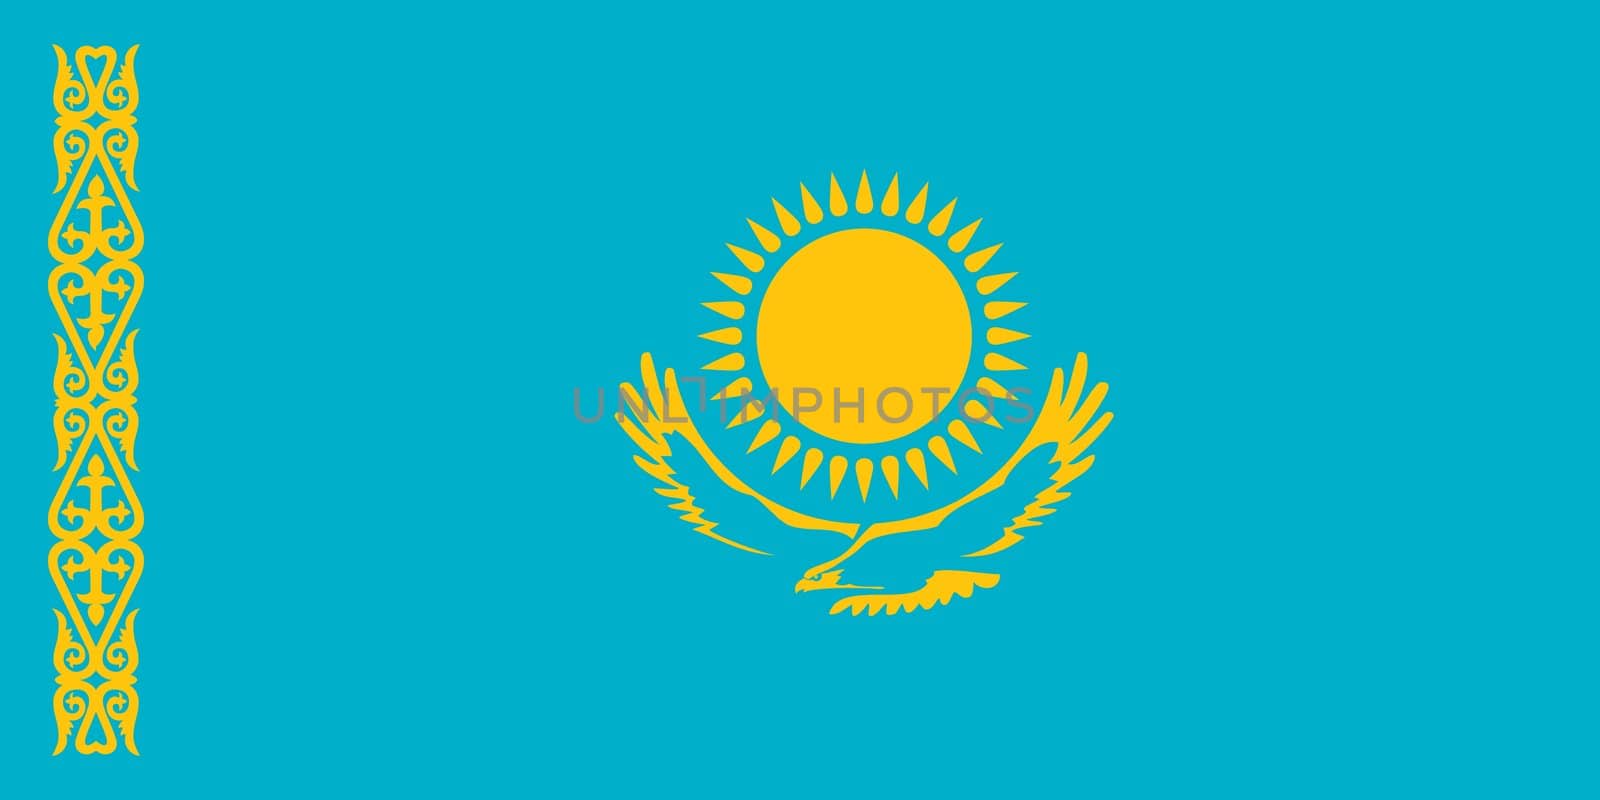 The national flag of Kazakhstan by claudiodivizia